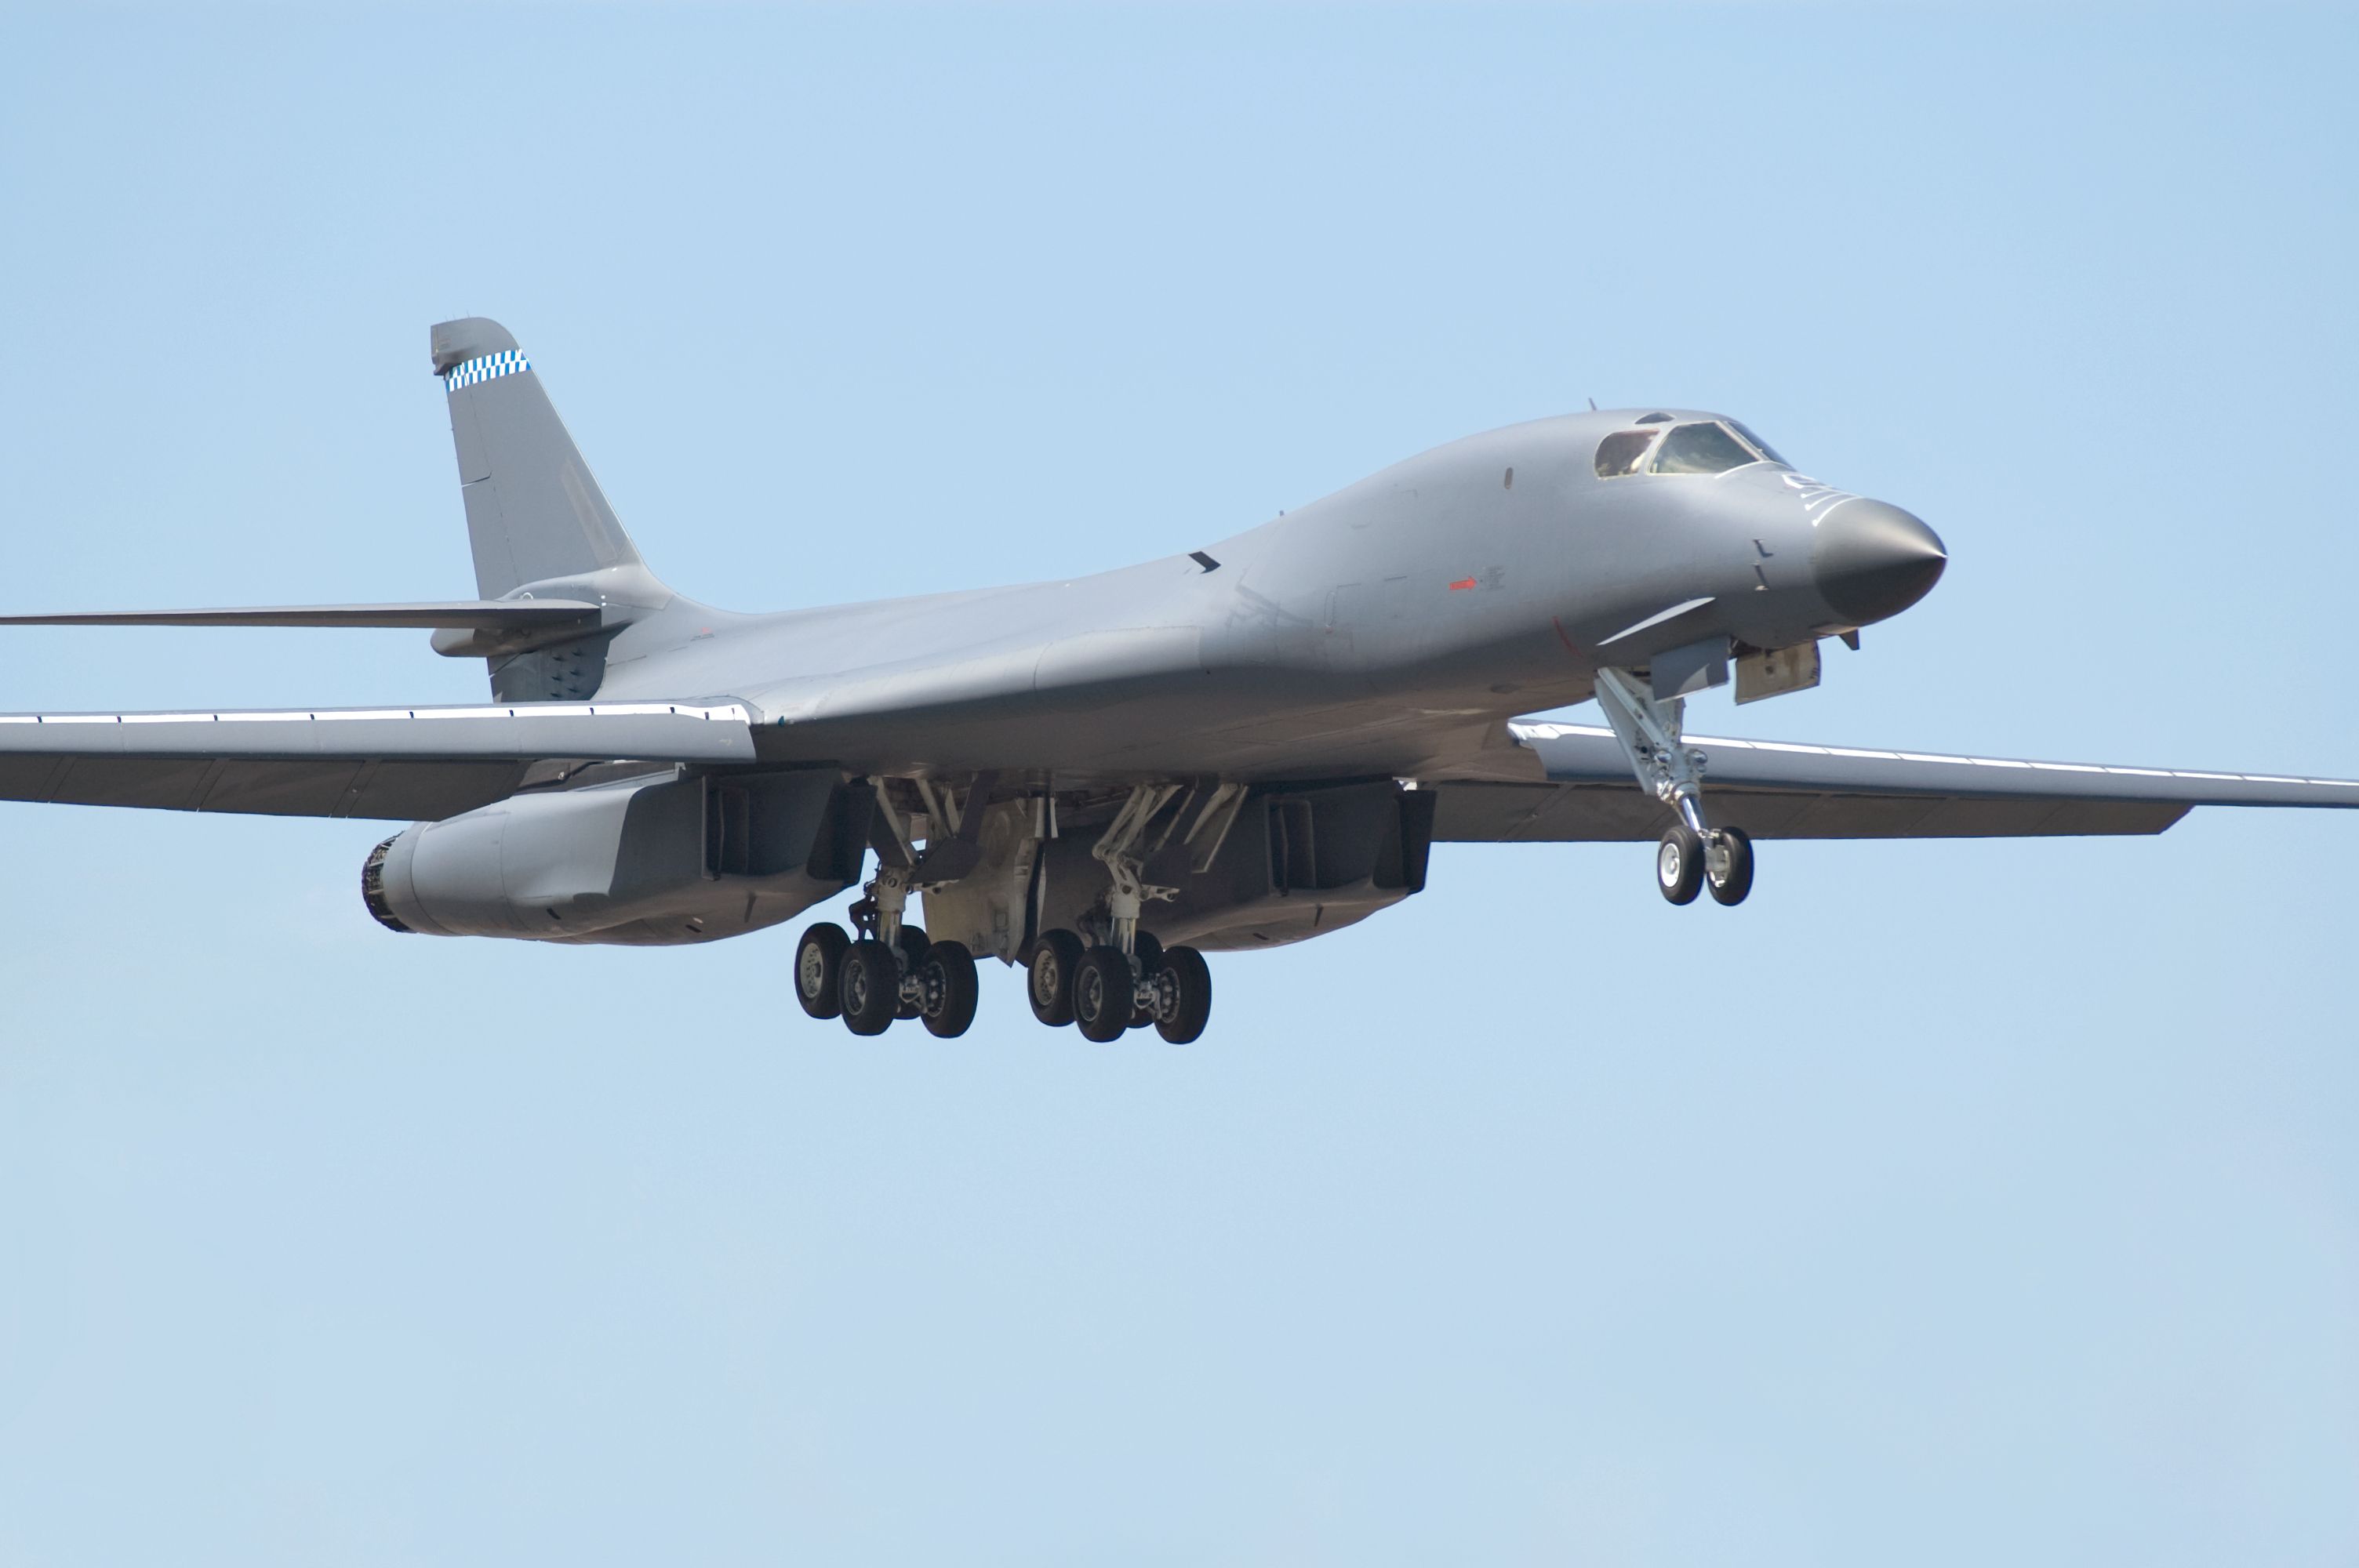 A Rockwell B-1 Lancer flying in the sky.